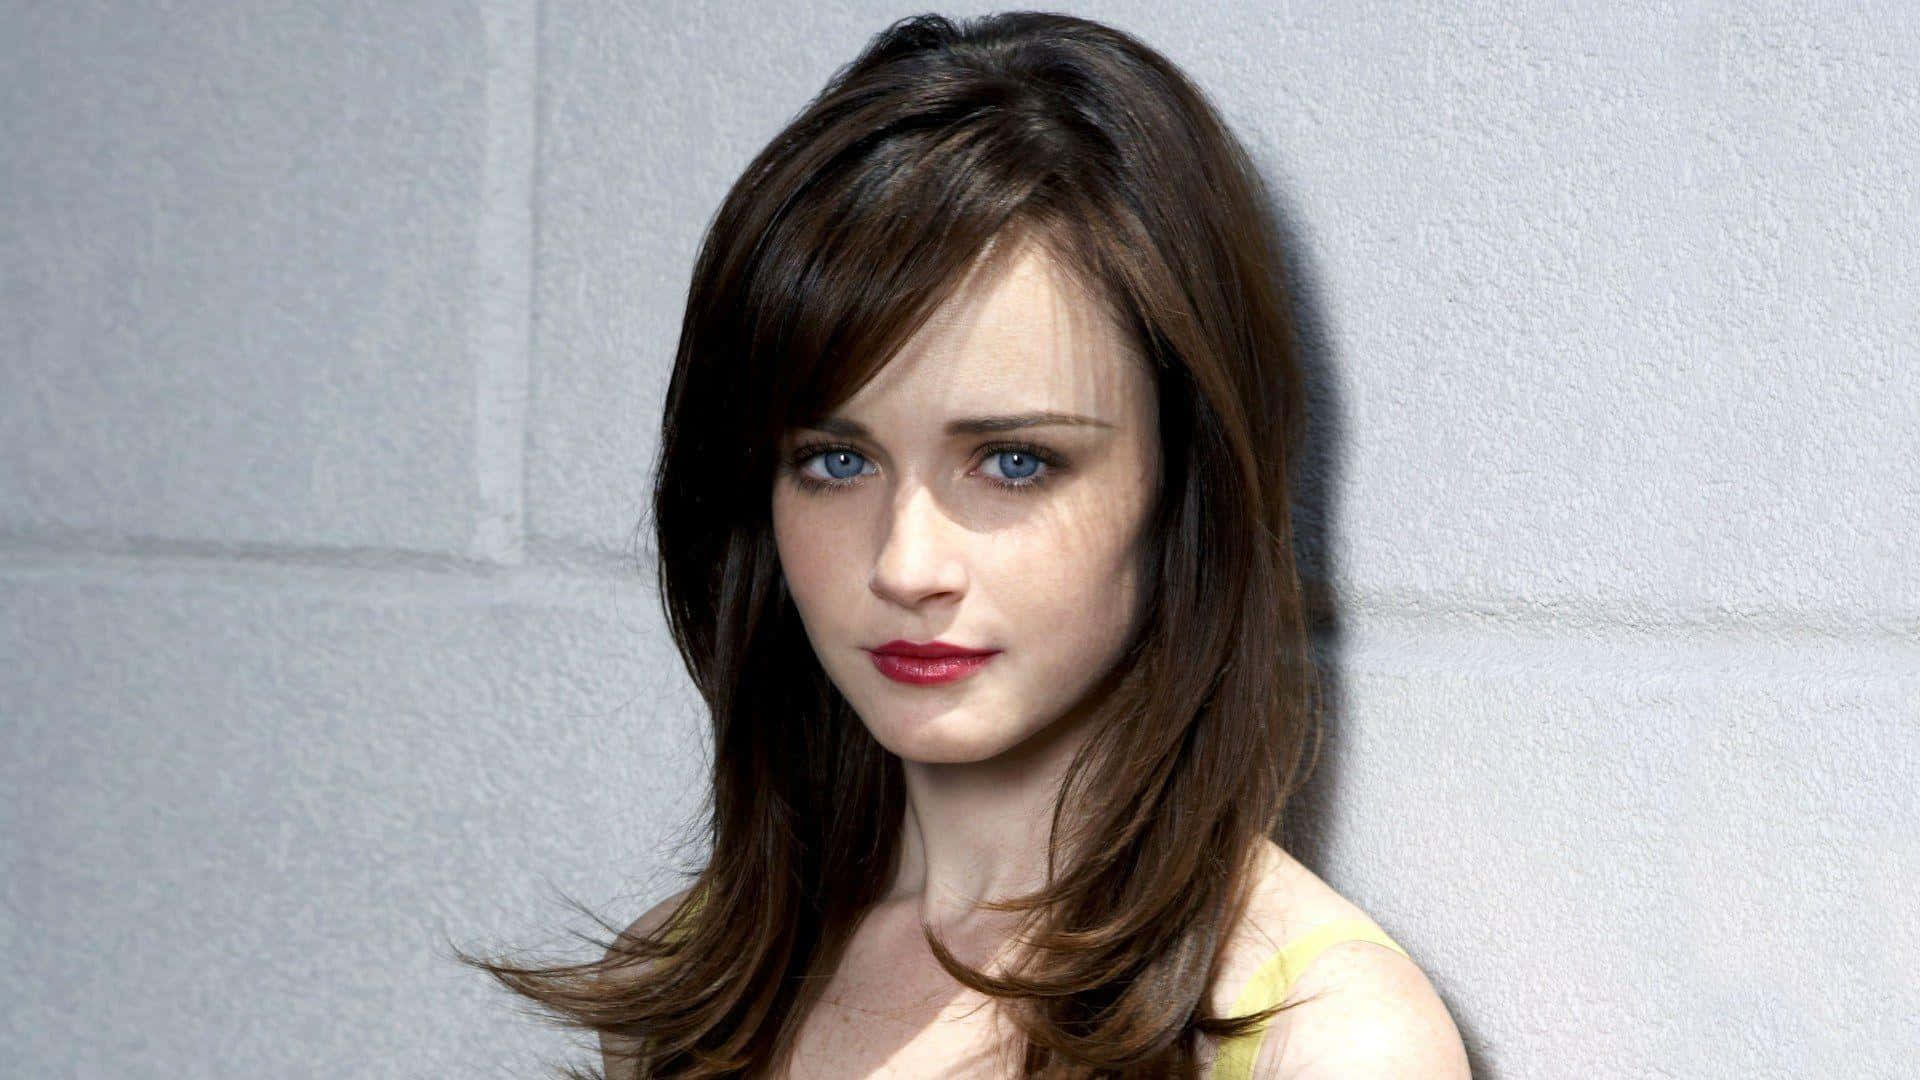 Alexis Bledel posing in a stunning photoshoot Wallpaper